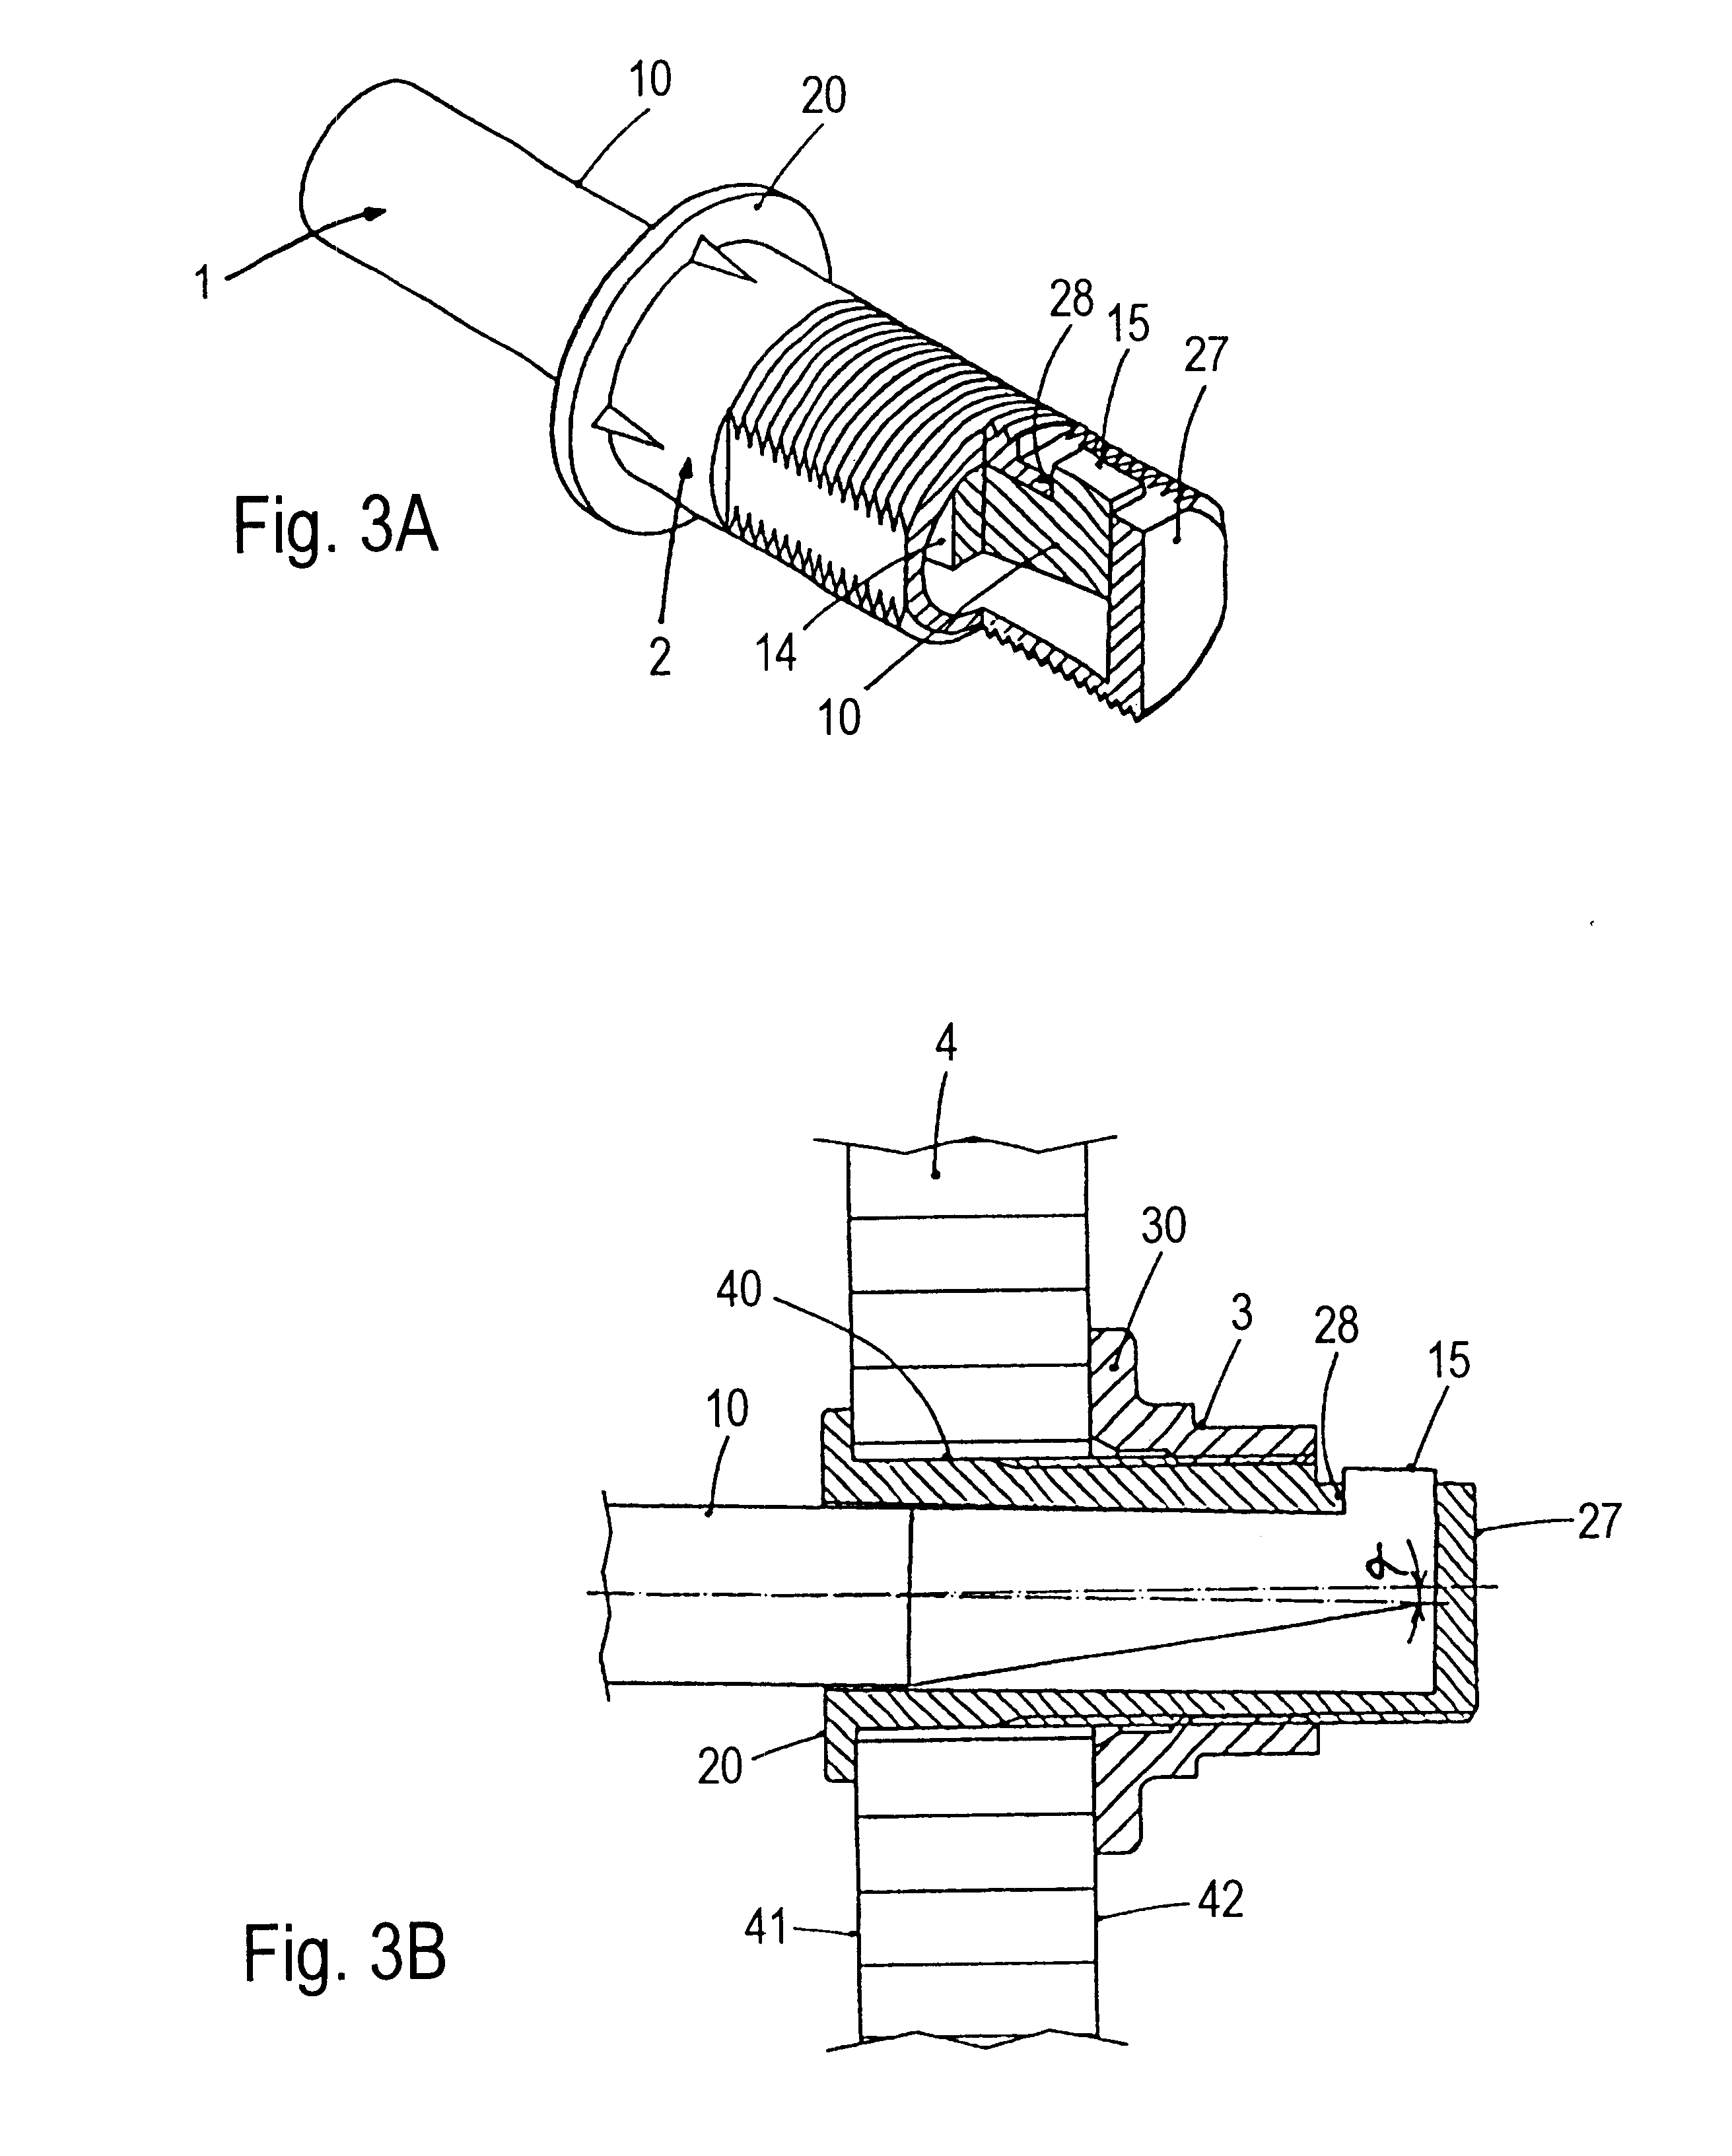 System of supporting bars for use in goods and services establishments